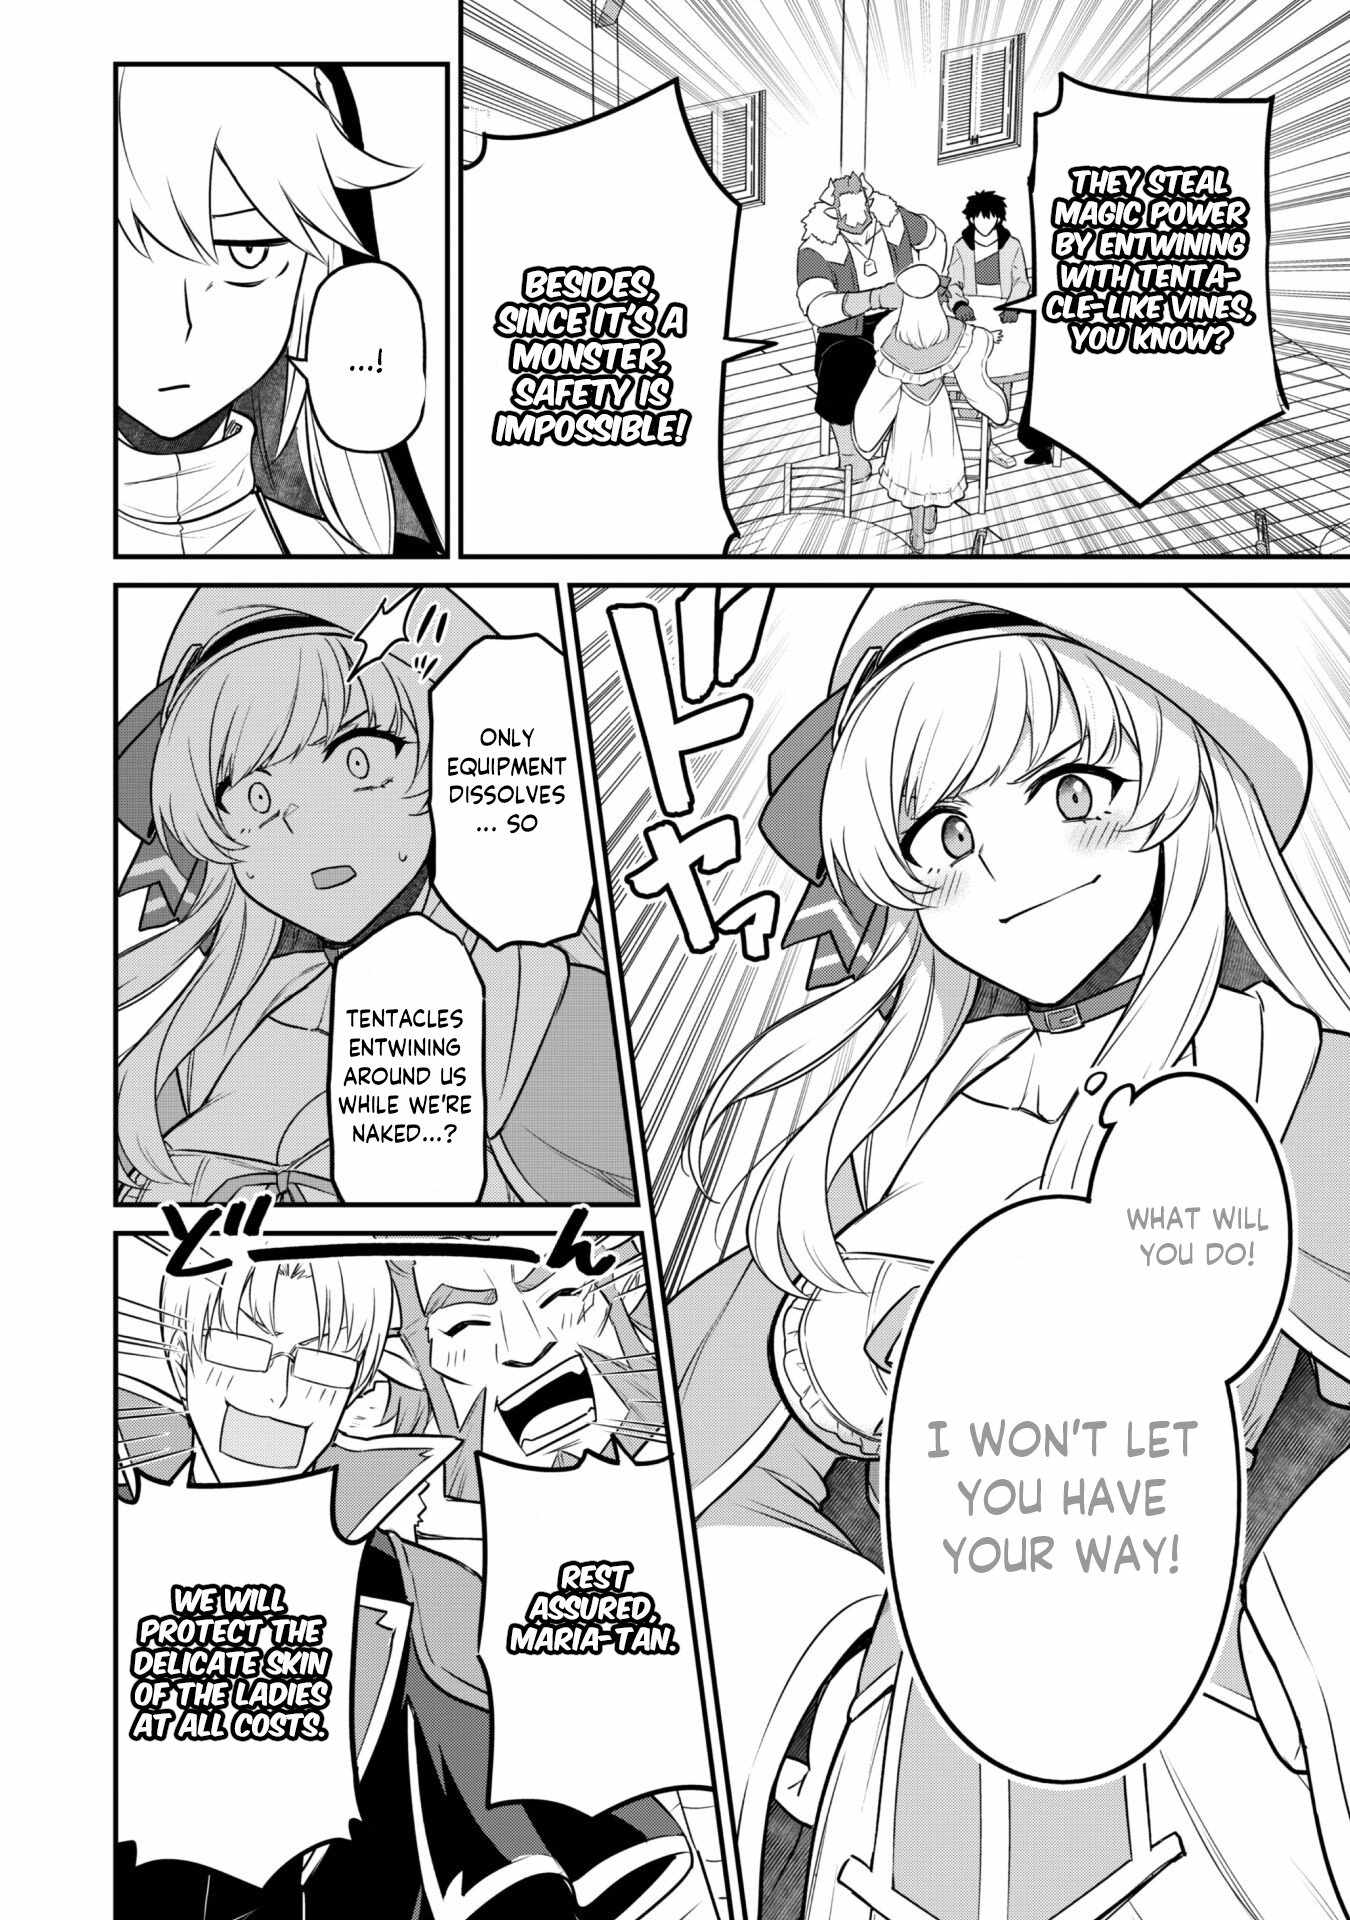 The White Mage Who Joined My Party Is a Circle Crusher, So My Isekai Life Is at Risk of Collapsing Once Again Chapter 6-1-eng-li - Page 7